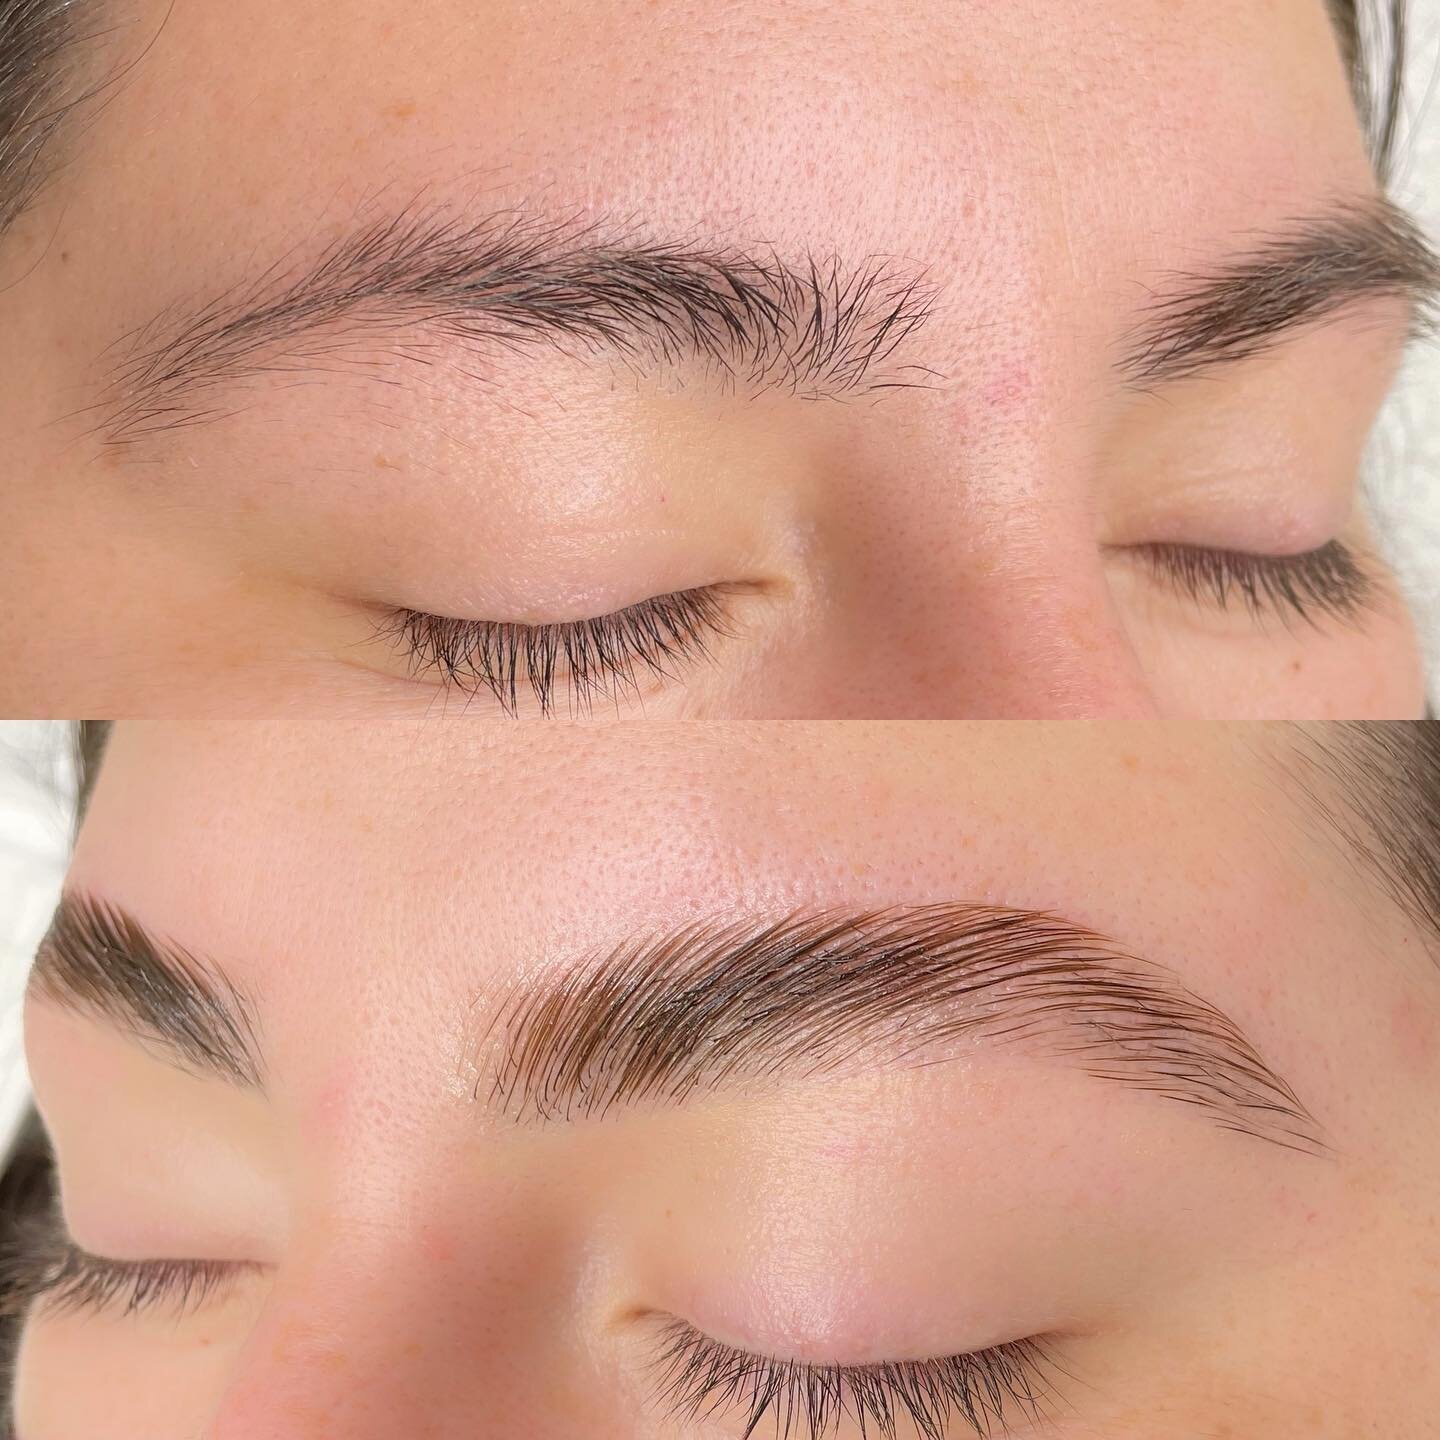 ＥＶＥＲＹ． ＨＡＩＲ． ＭＡＴＴＥＲＳ！
🔎Zoom in on the arch to see the hair I kept to give her an illusion of a fuller brow! Brow Lamination can really transform your look but just make sure you let your brow artist know what your brow goals are: fuller? thicker? th